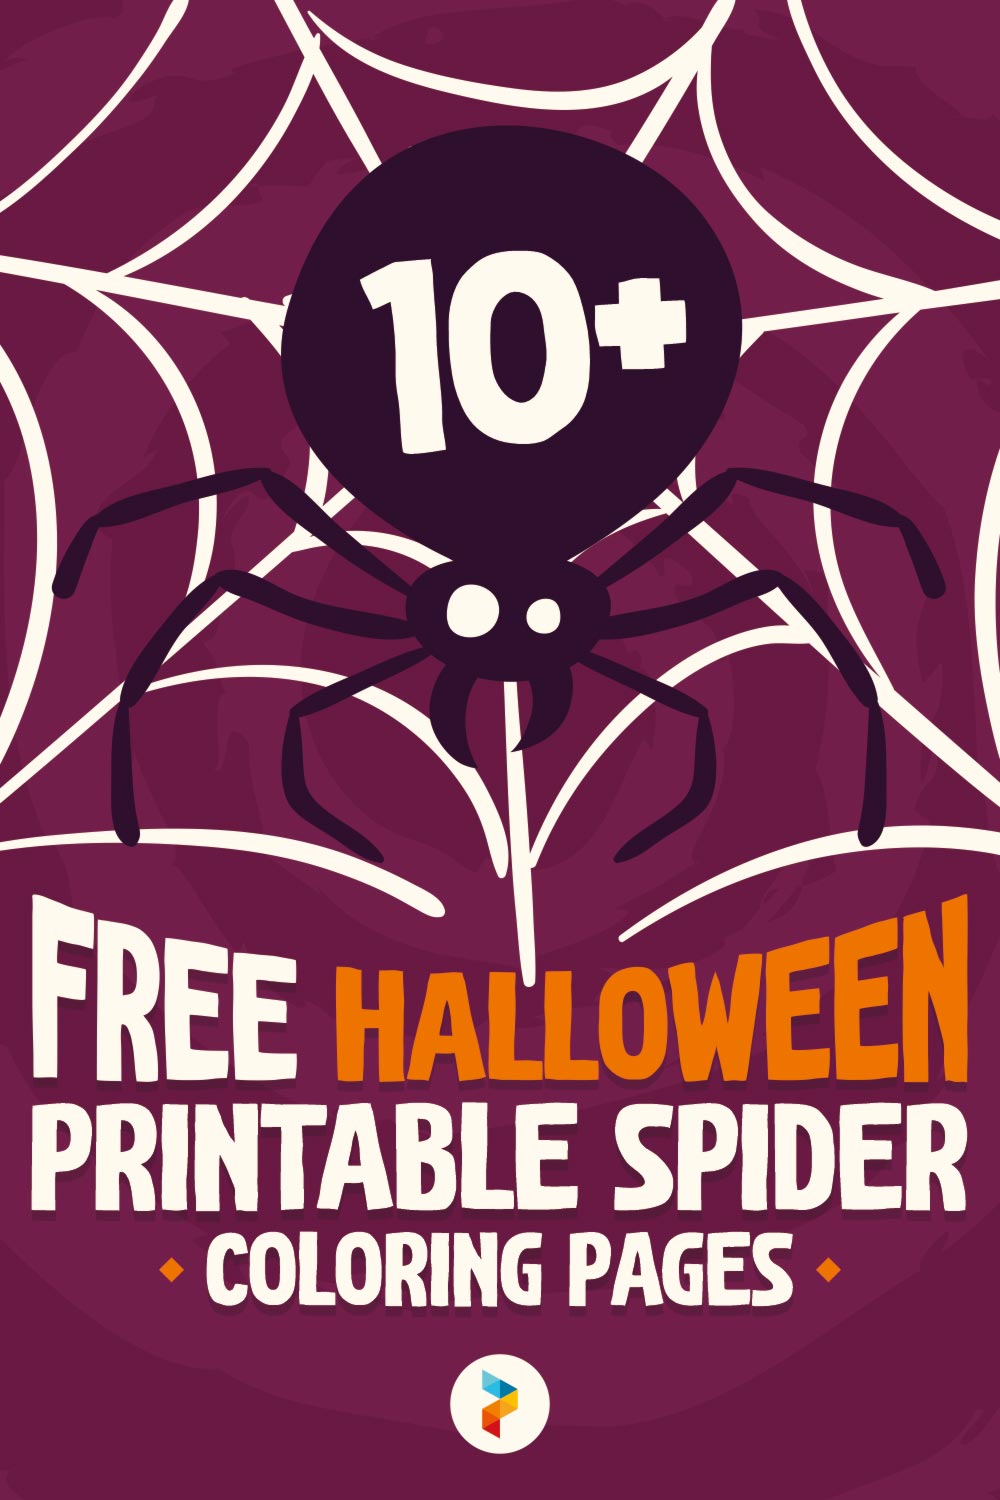 Halloween Printable Spider Coloring Pages